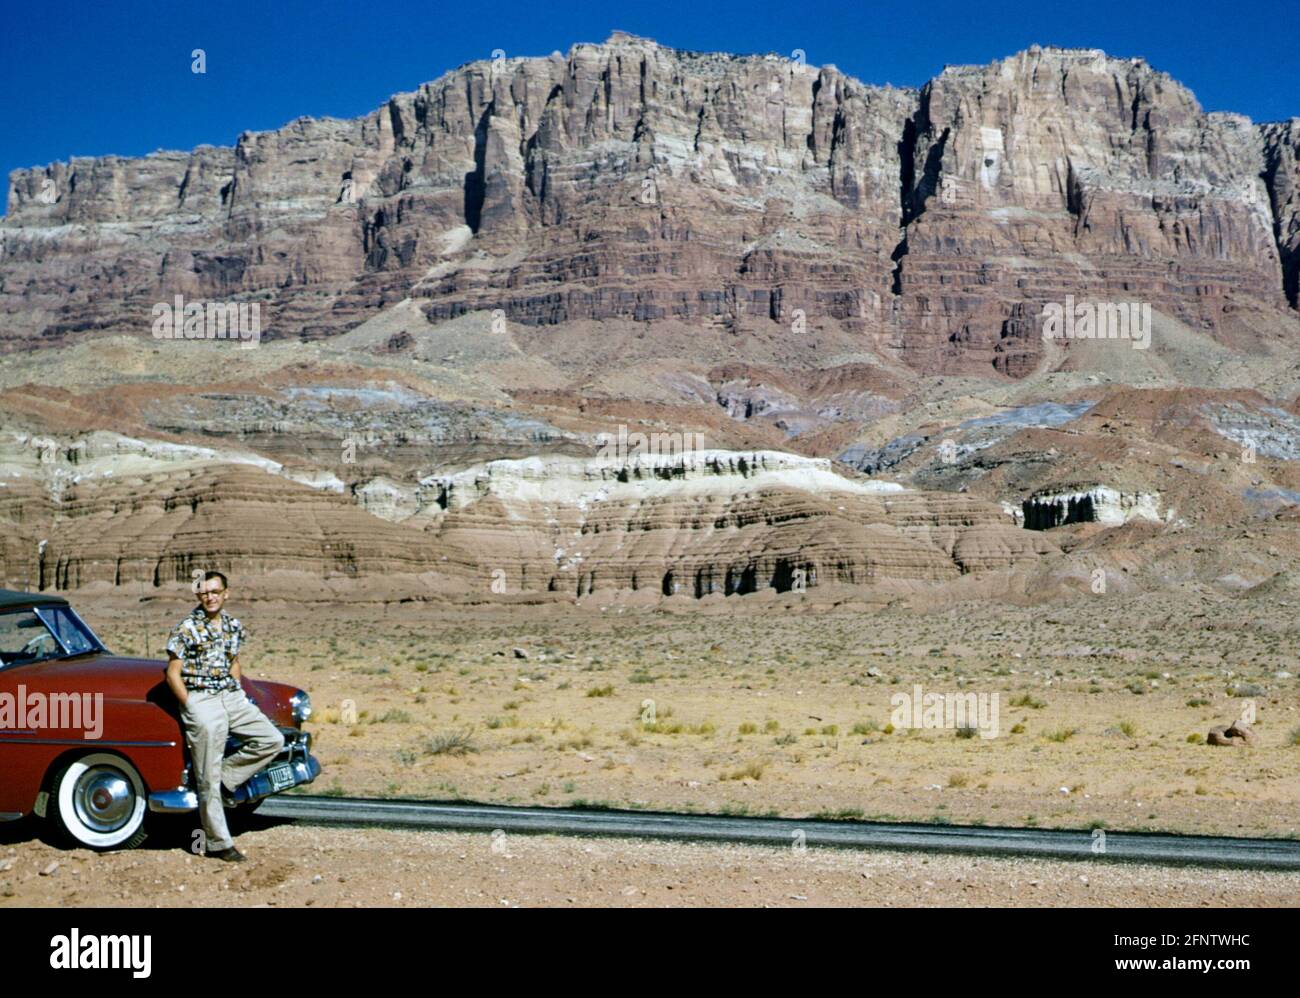 Young man leaning on a red 1952 Plymouth convertible car with white wheel rims in 1950s. The car is parked at the roadside next to the Painted Desert cliffs, Arizona, USA in the 1950s Stock Photo